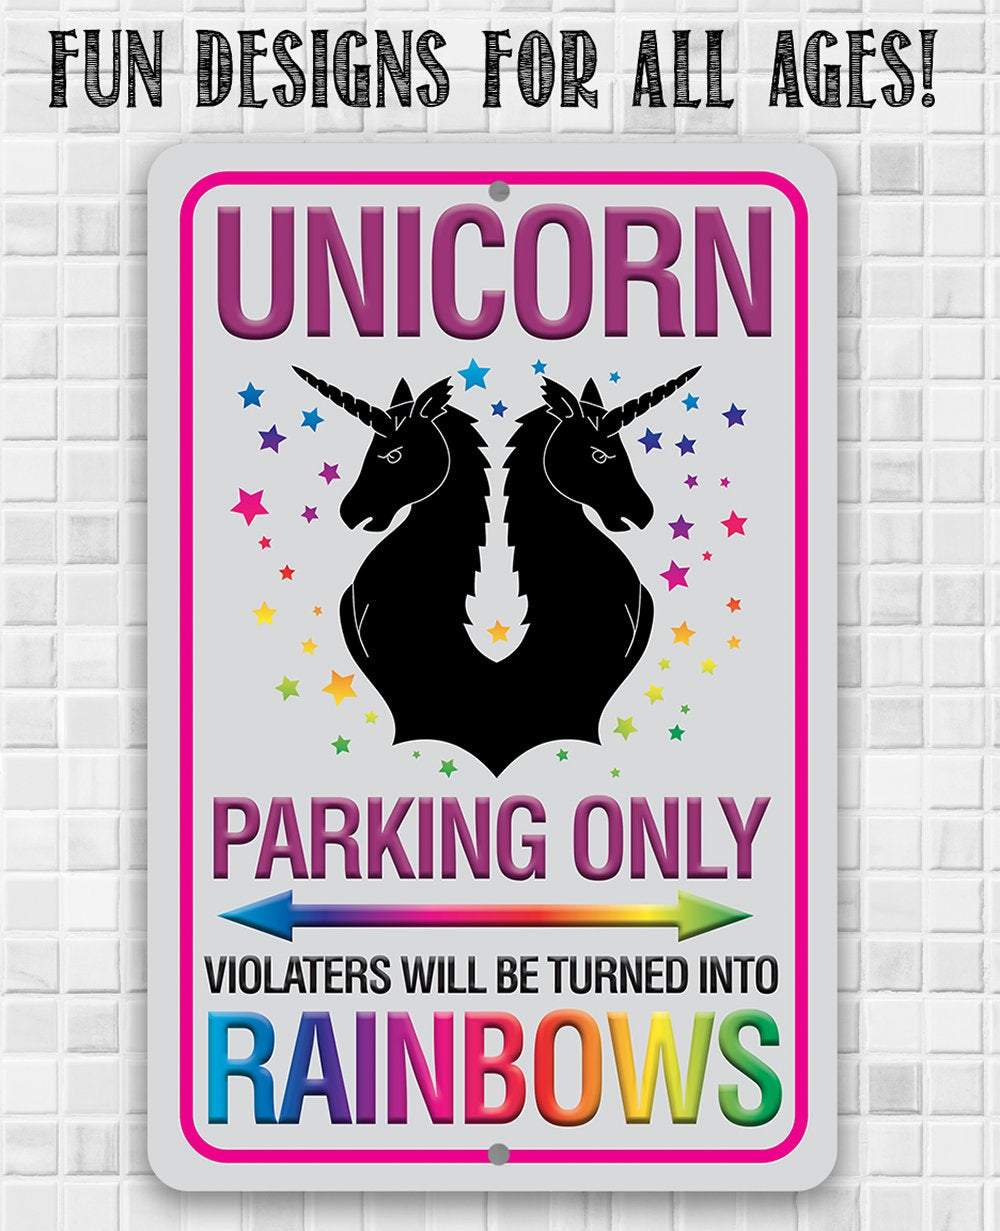 Unicorn Parking Only - Metal Sign | Lone Star Art.